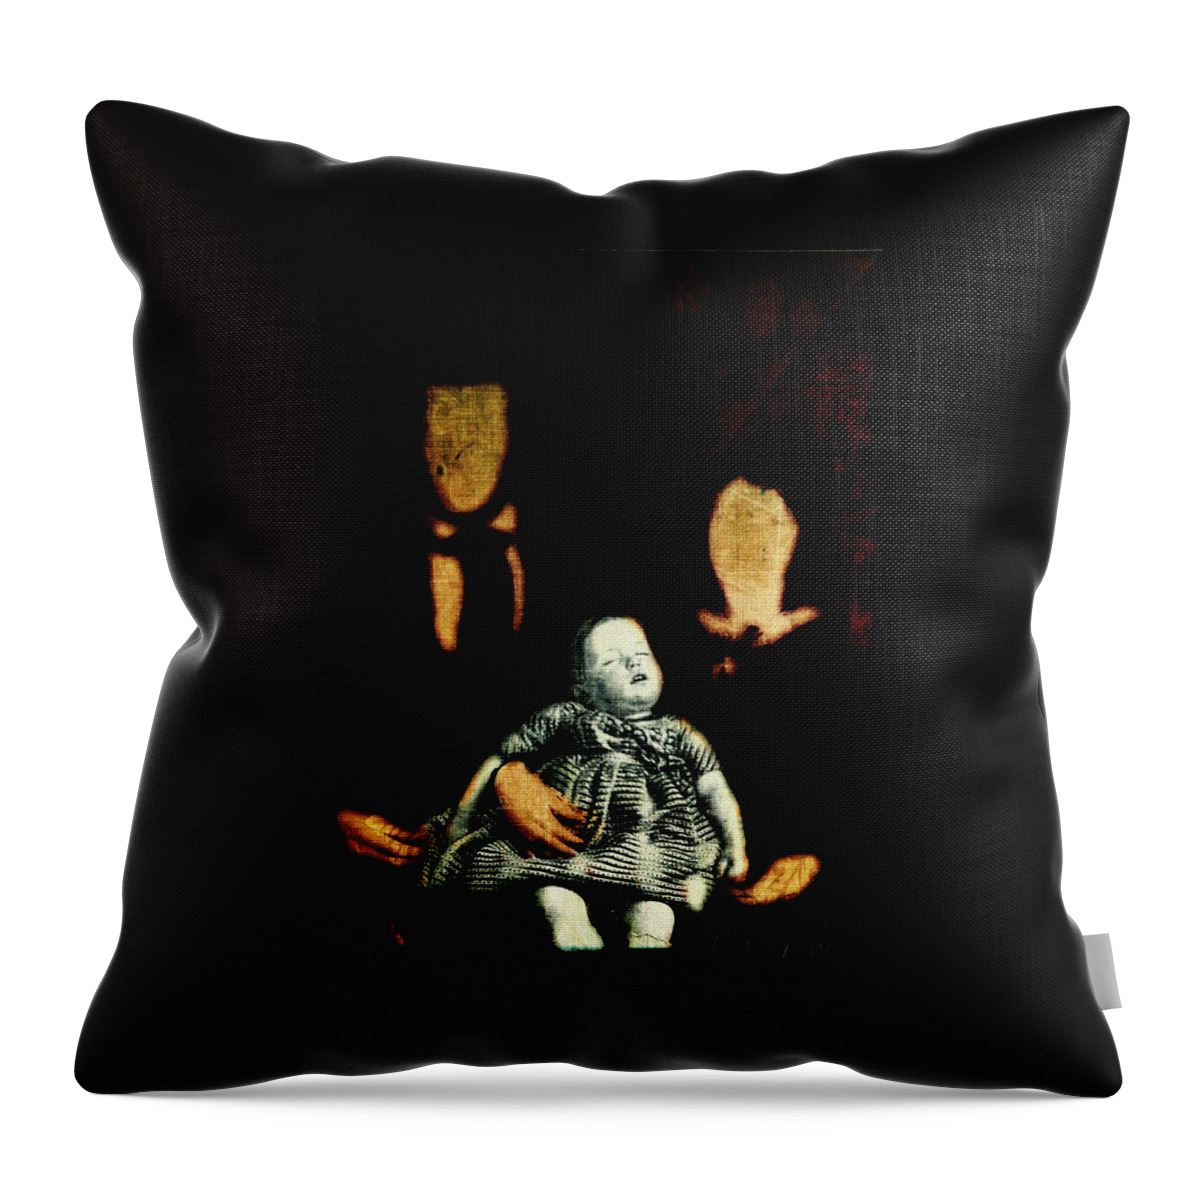 Post Mortem Child Throw Pillow featuring the digital art Nuclear Family by Delight Worthyn